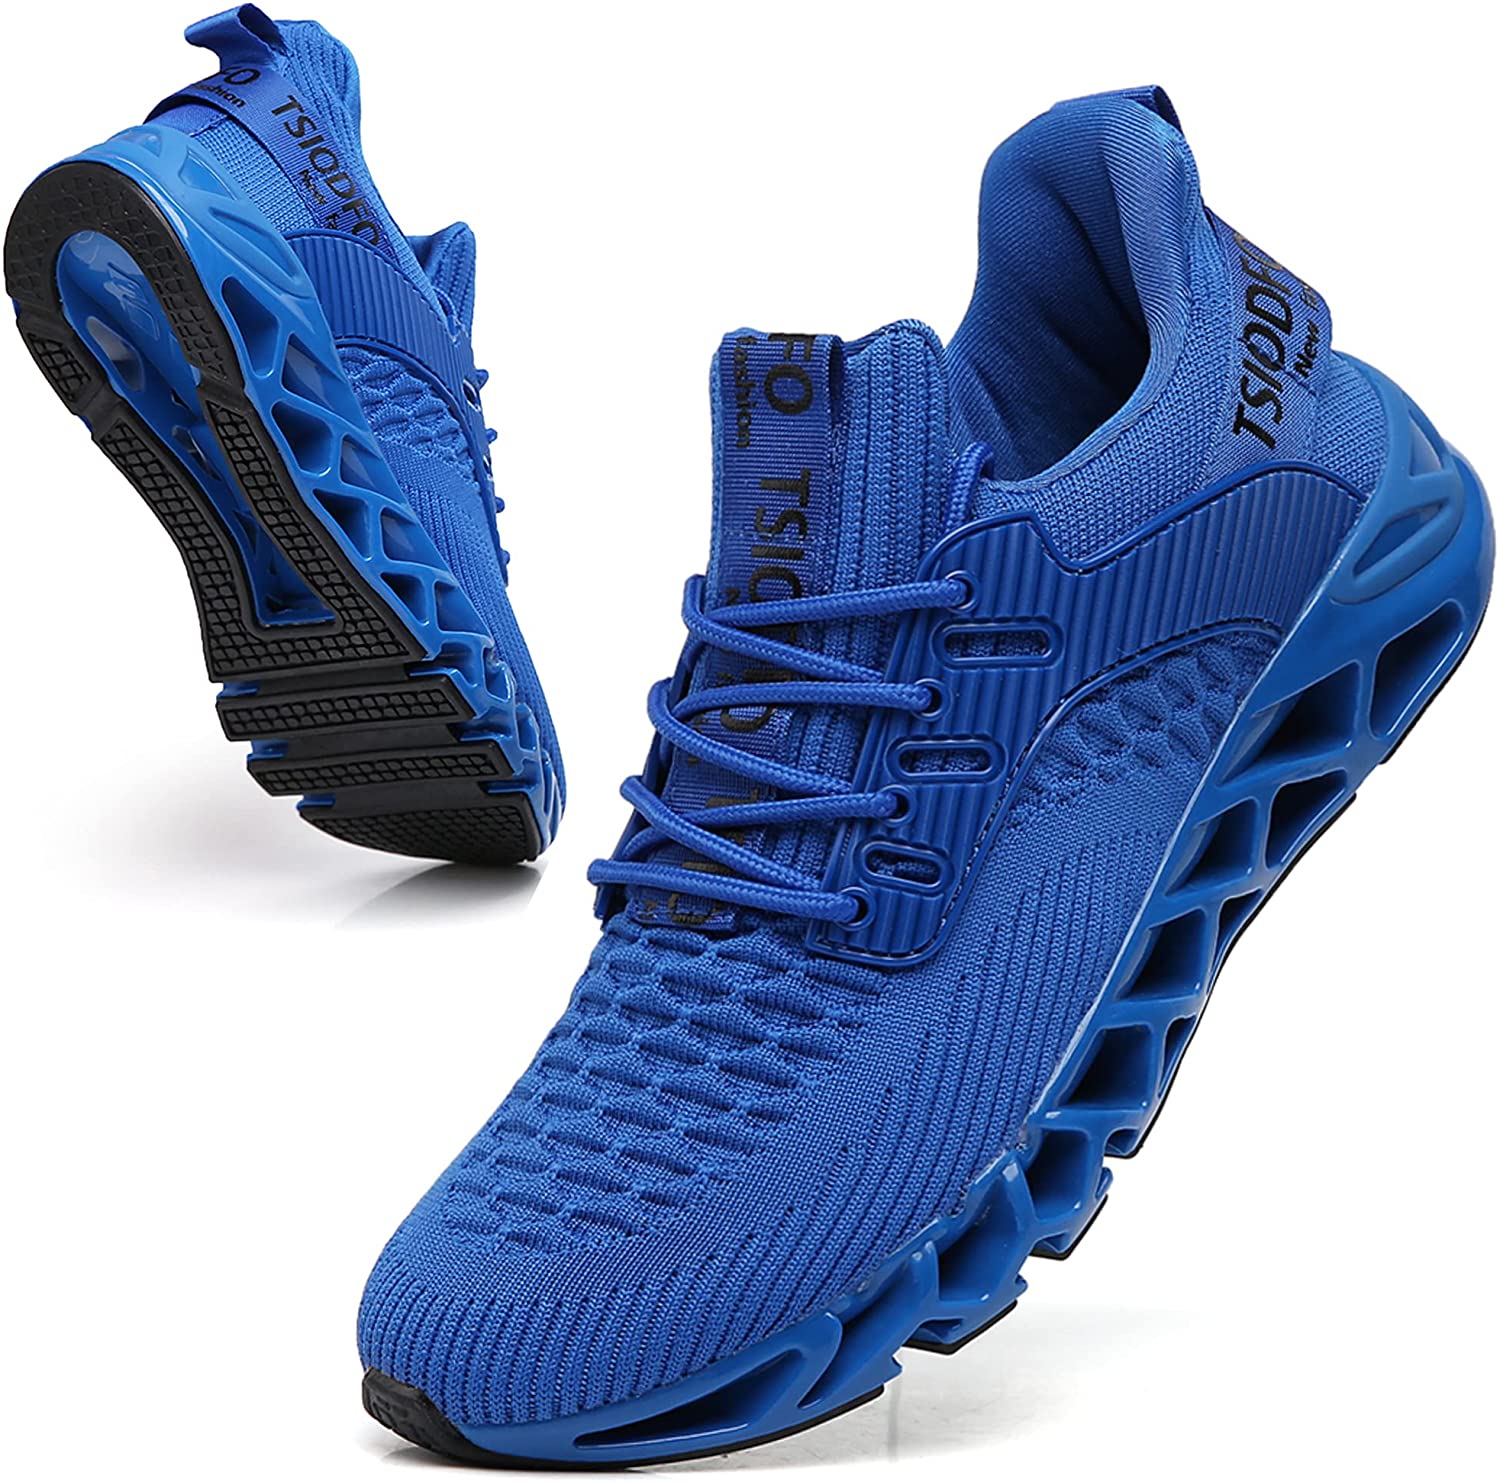 SKDOIUL Men Sport Running Shoes Mesh Breathable Trail Runners Fashion Sneakers 